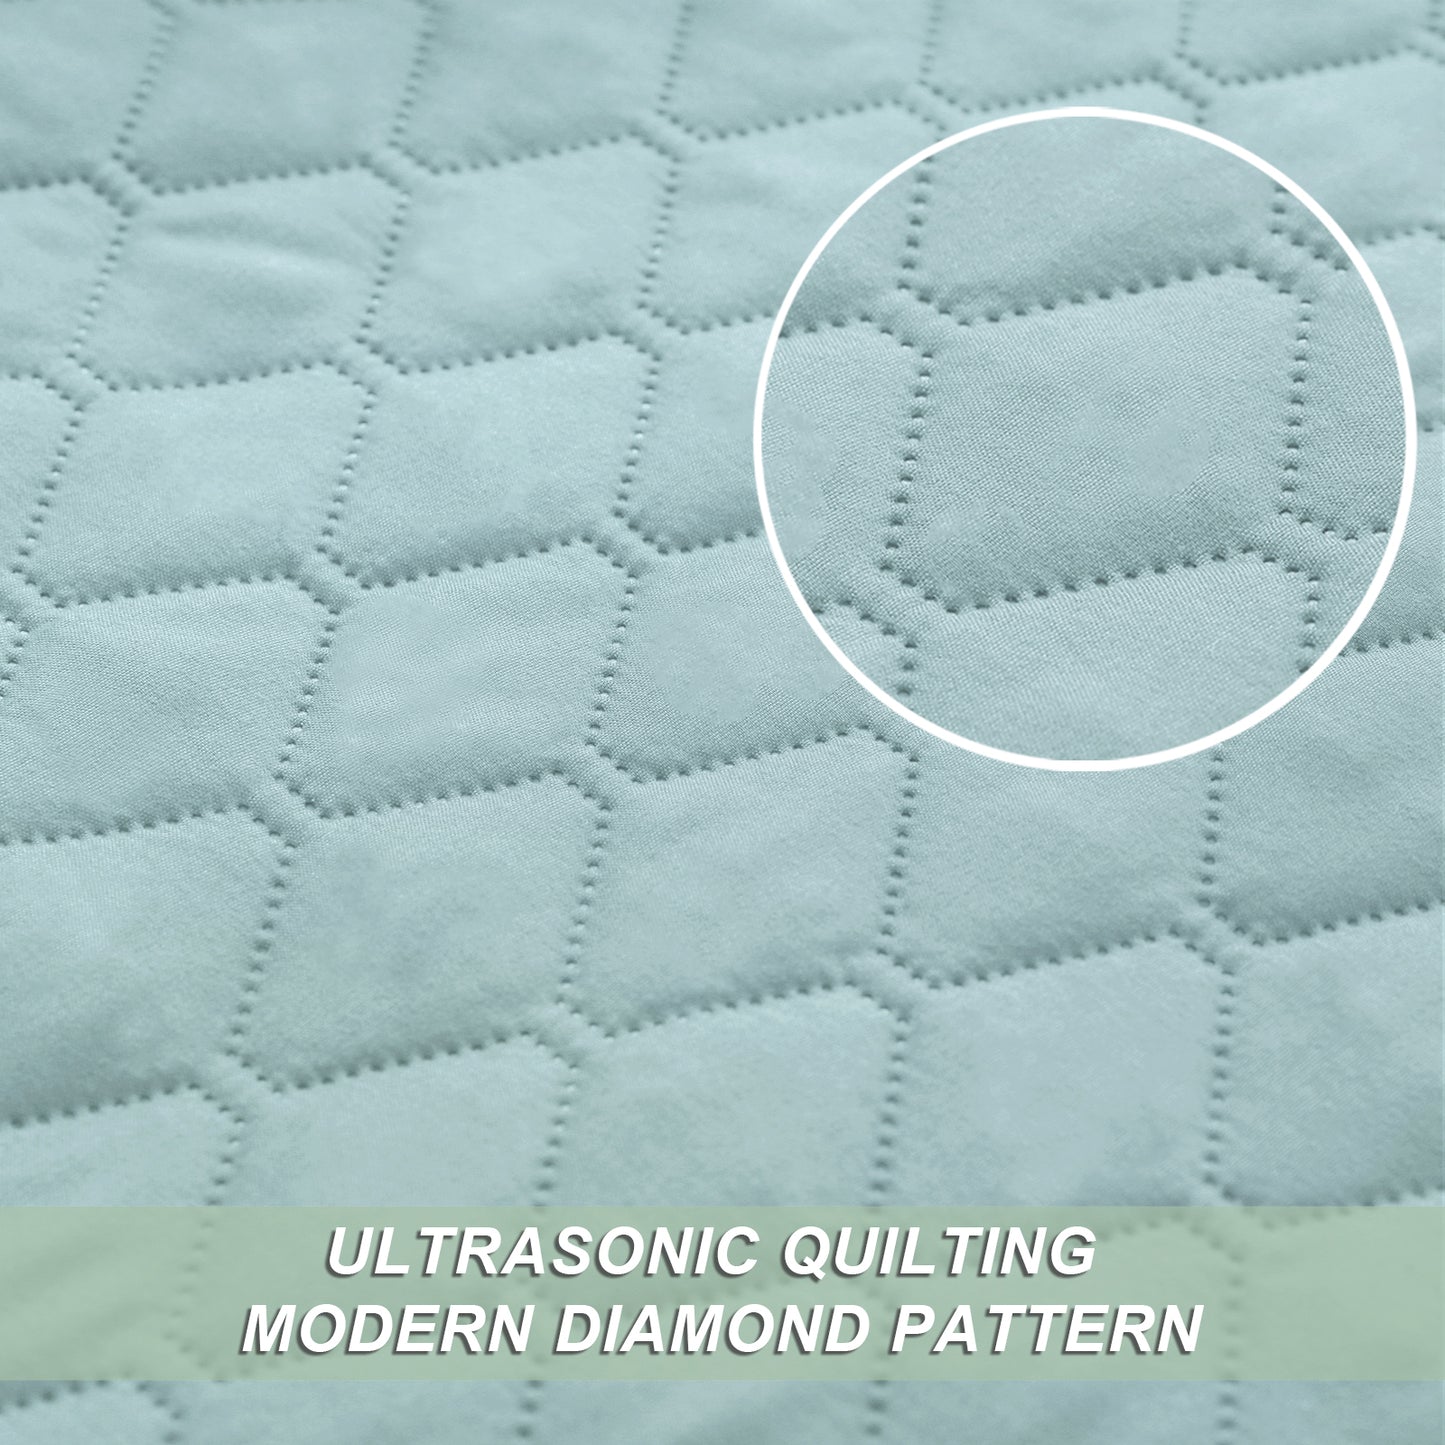 Exclusivo Mezcla Ultrasonic Reversible Twin Quilt Bedding Set with Pillow Sham, Lightweight Quilts Twin Size, Soft Bedspreads Bed Coverlets for All Seasons - (Aqua Blue, 68"x88")